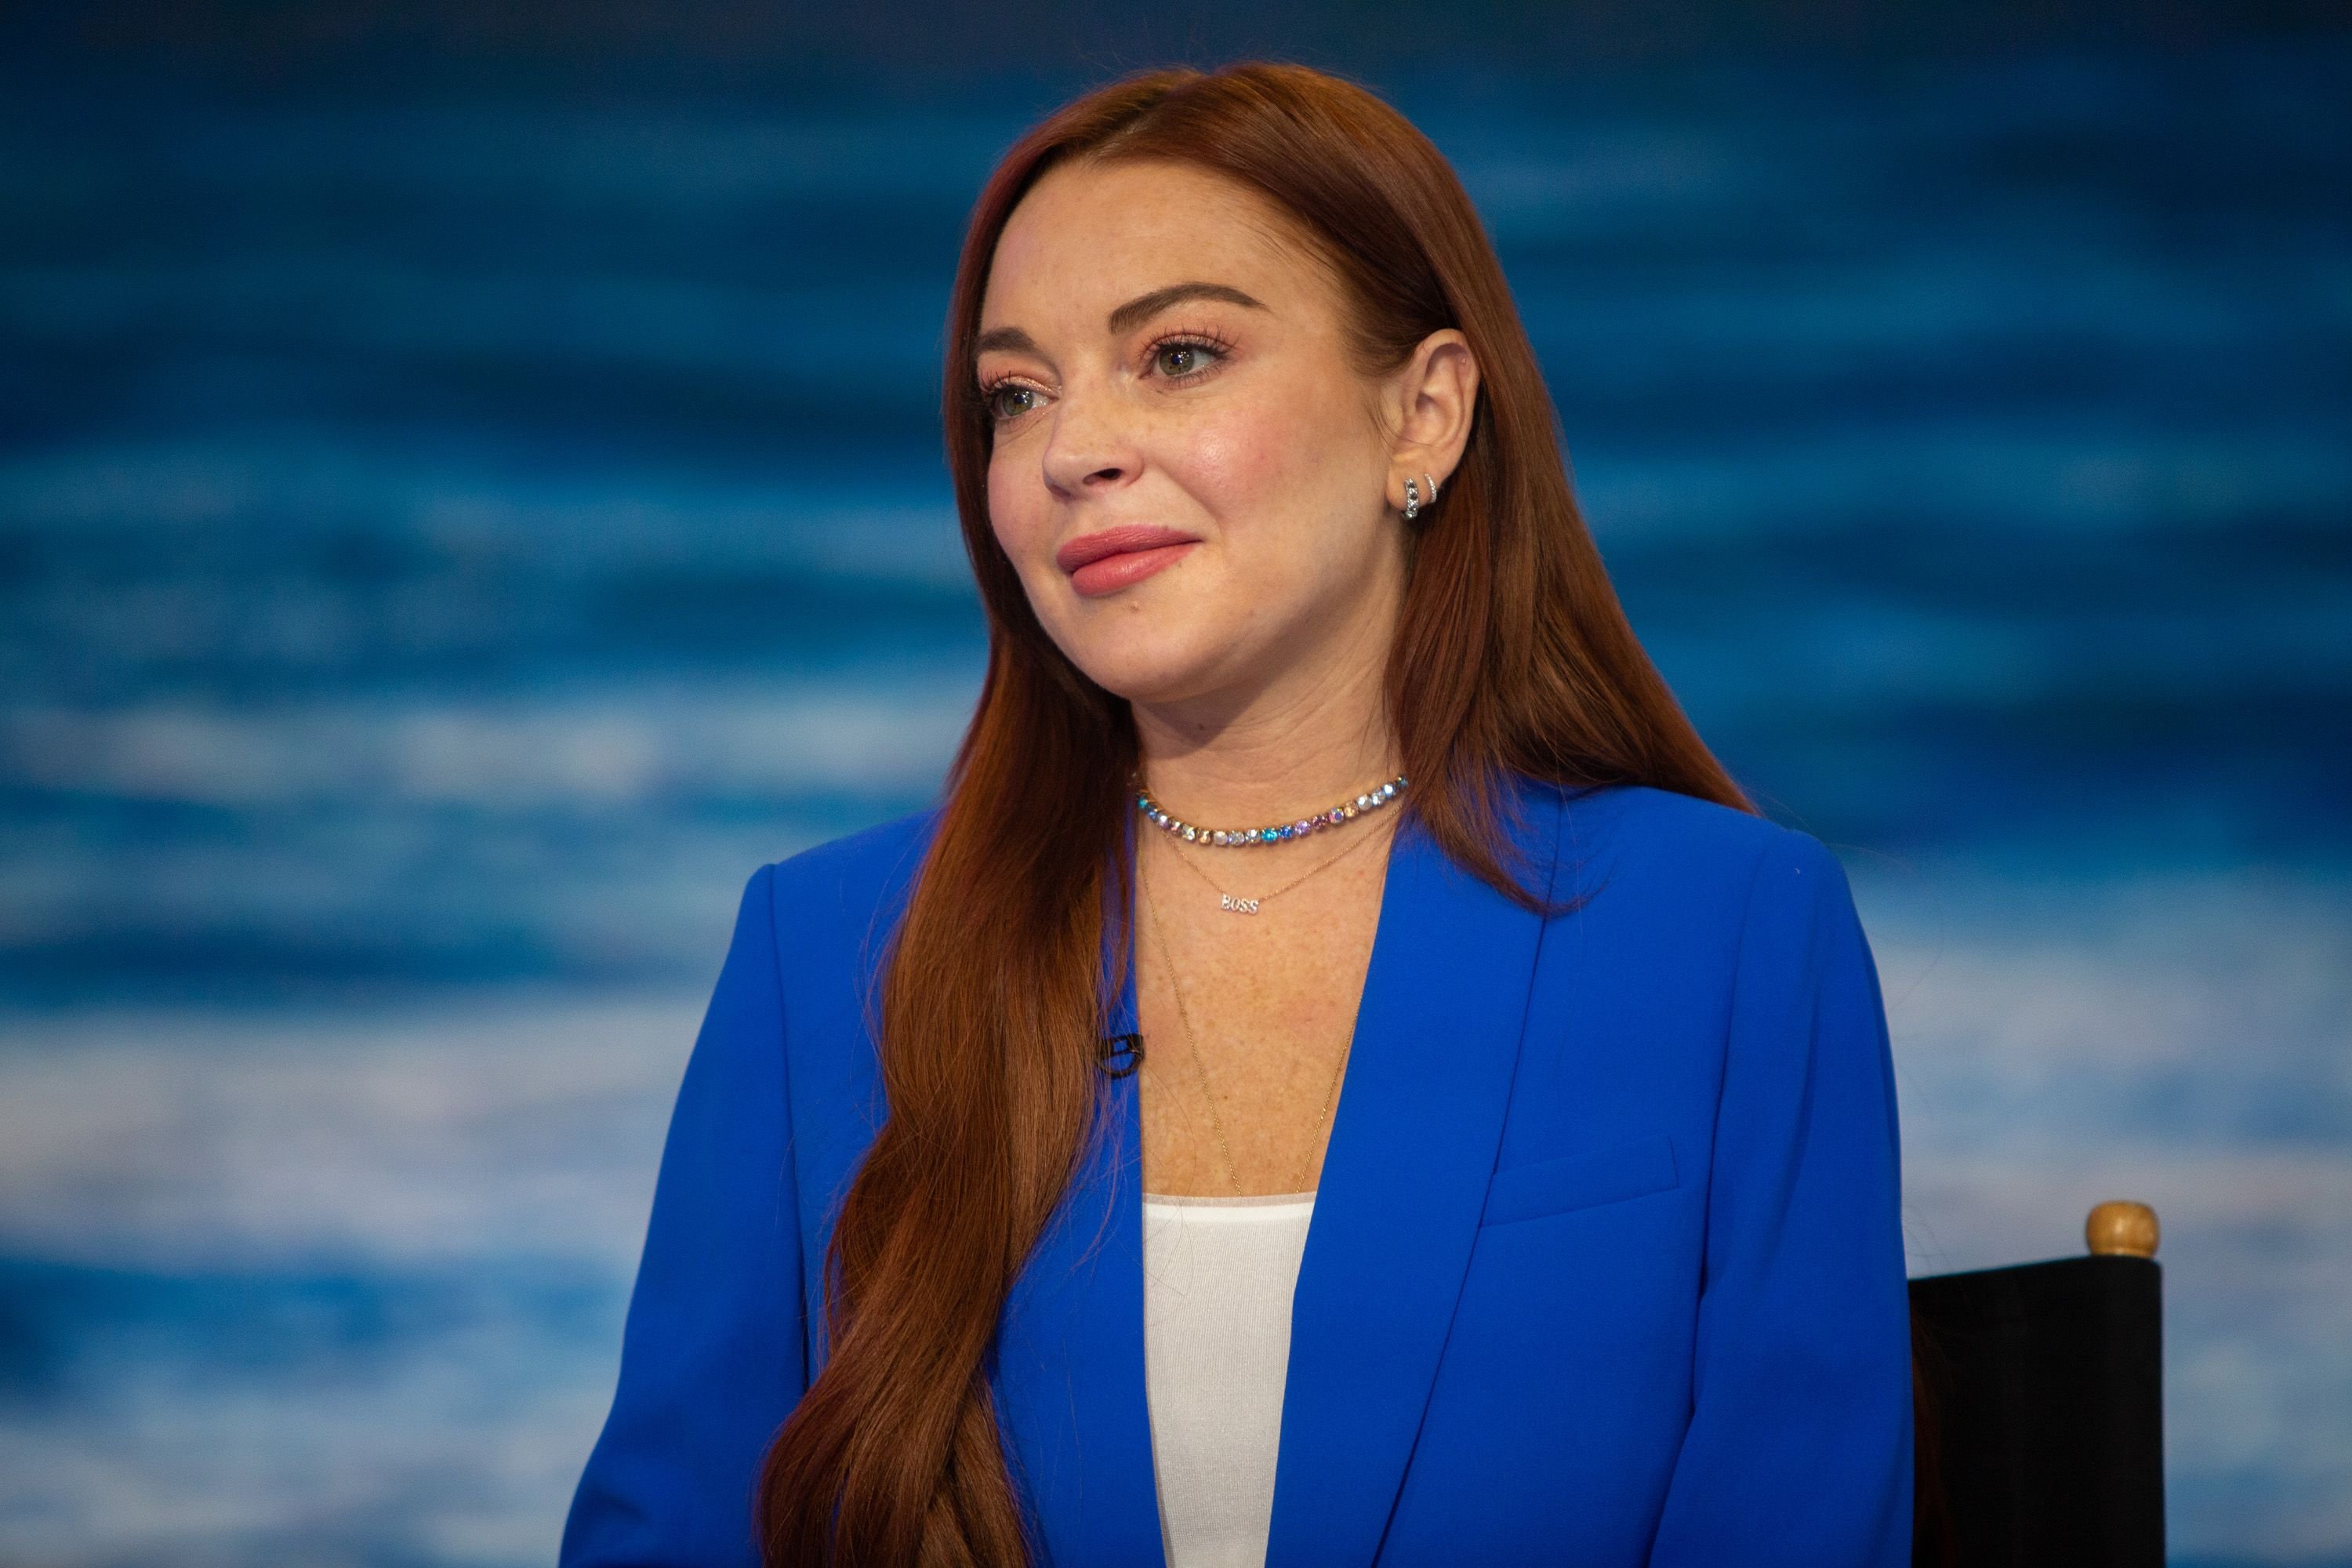 Lindsay Lohan on "Today," January 11, 2019. Source: Getty Images